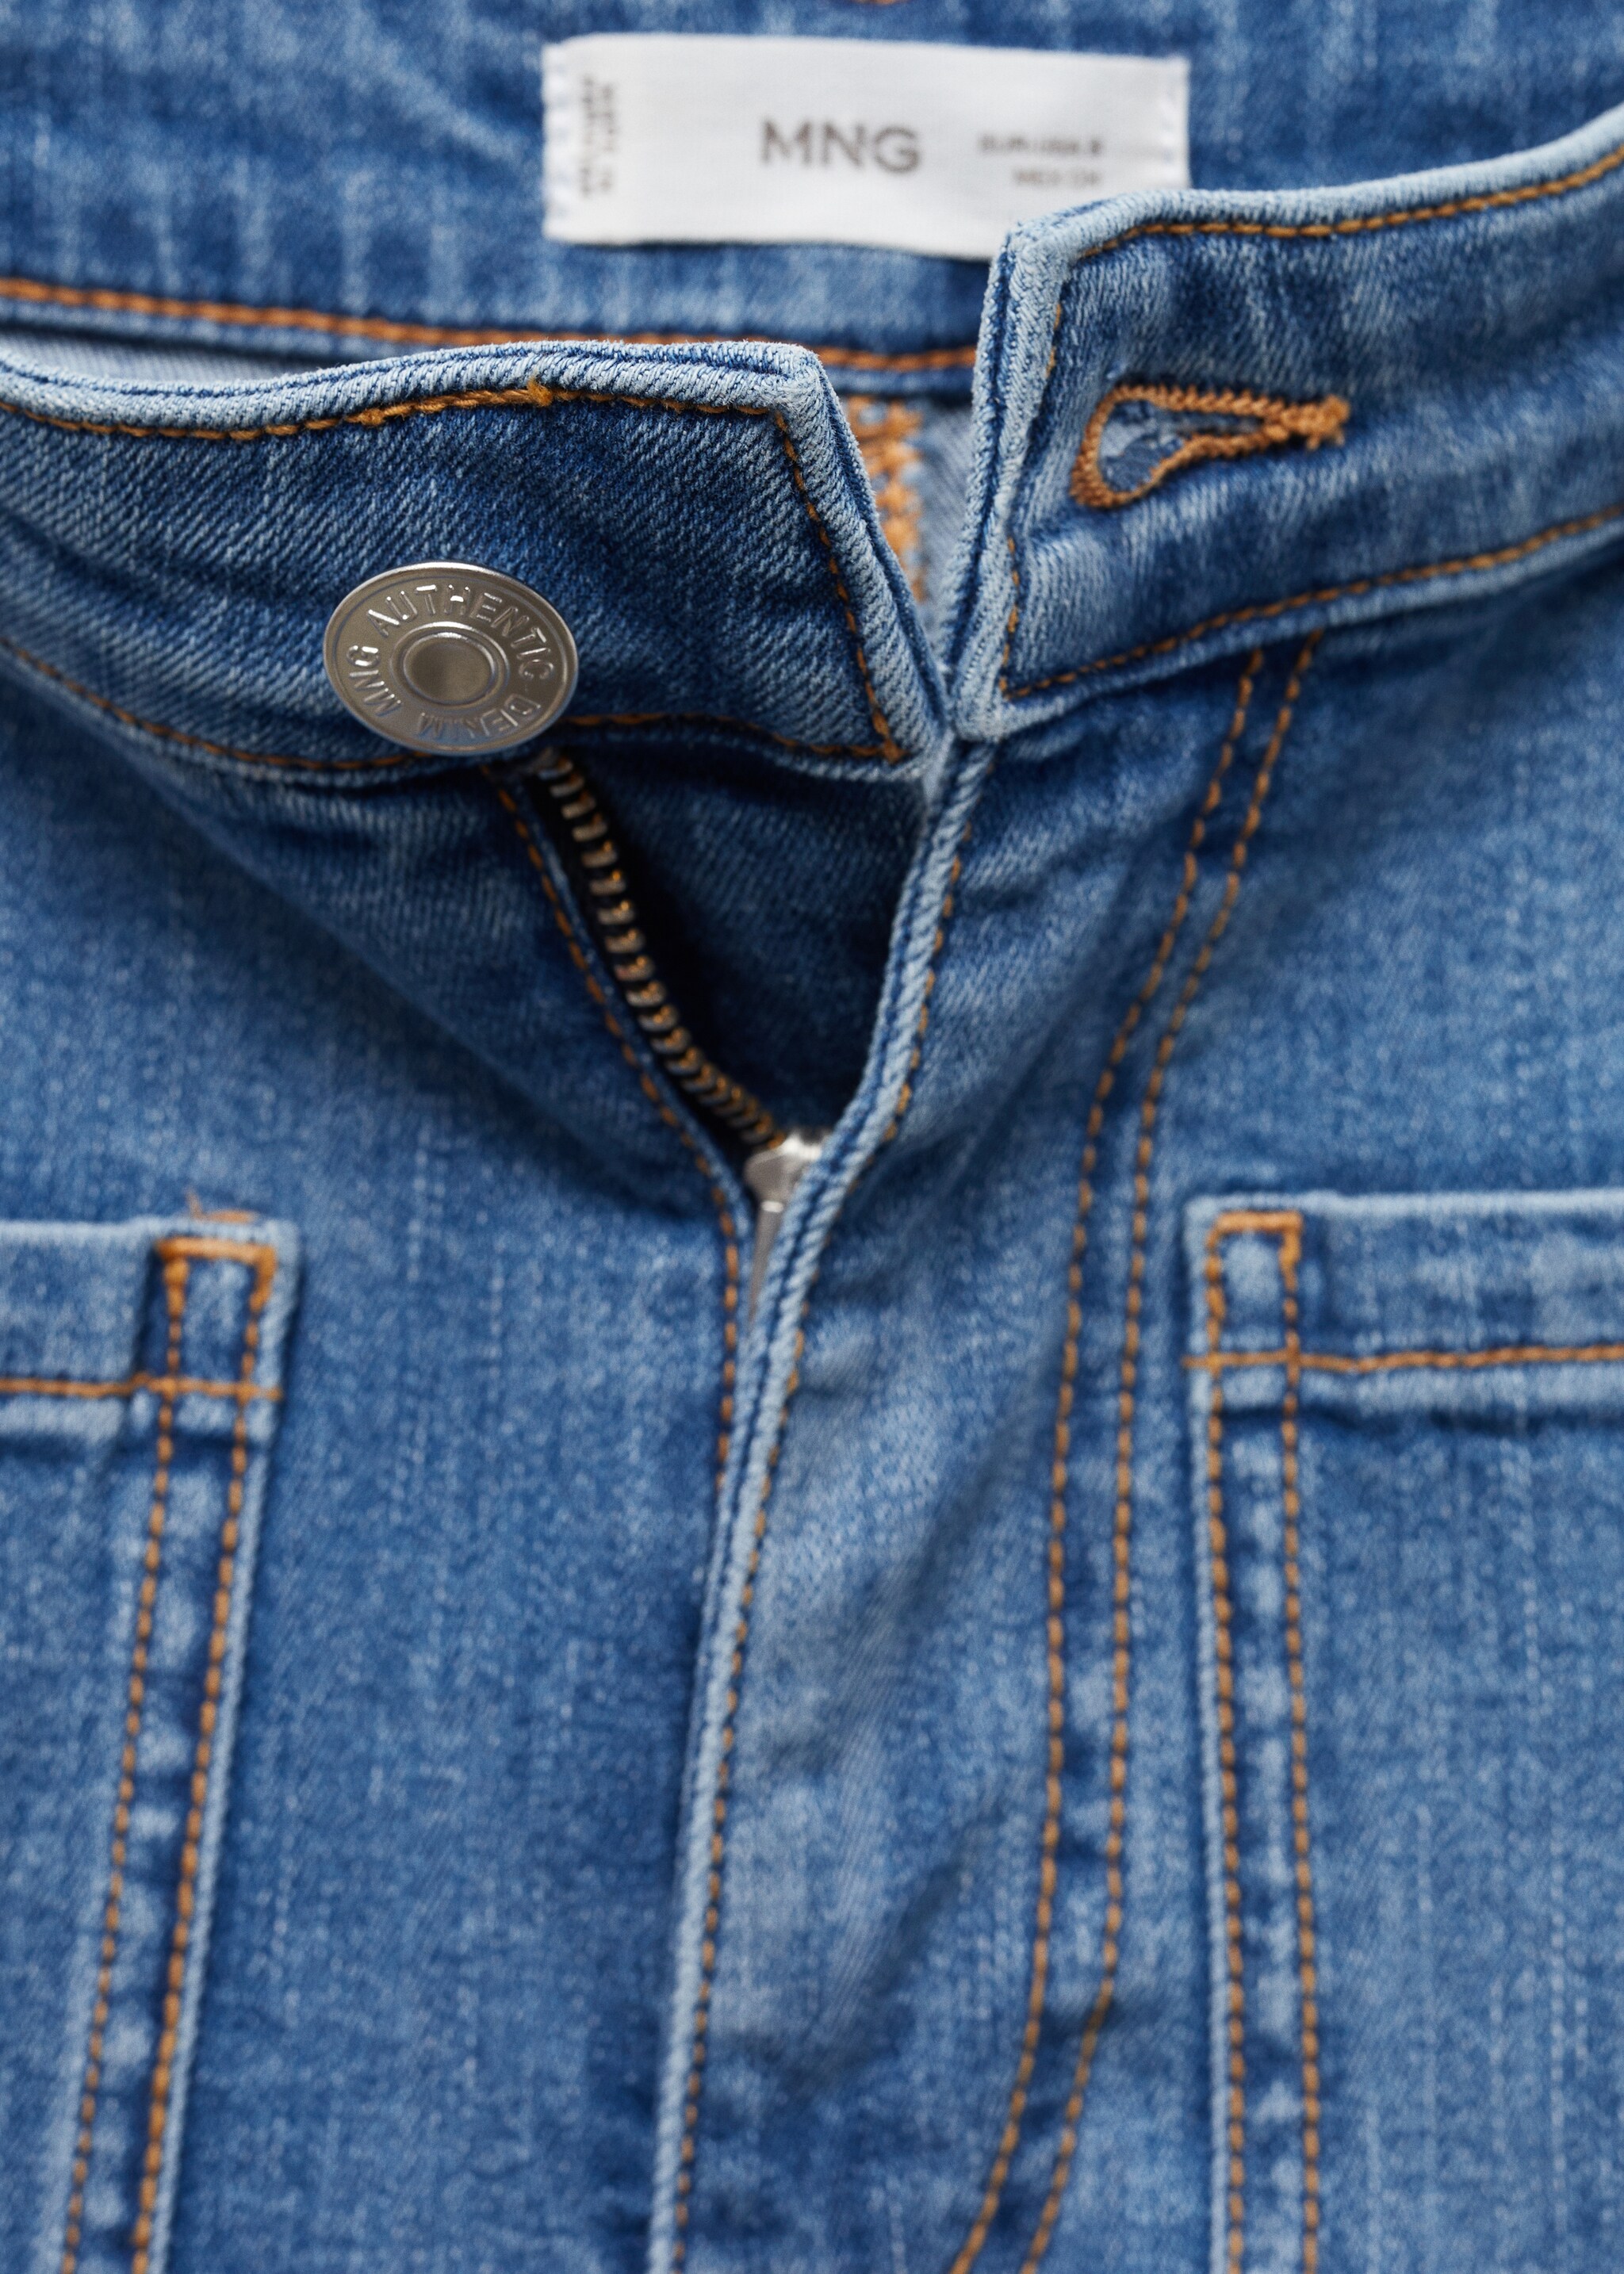 Denim shorts with pockets - Details of the article 8